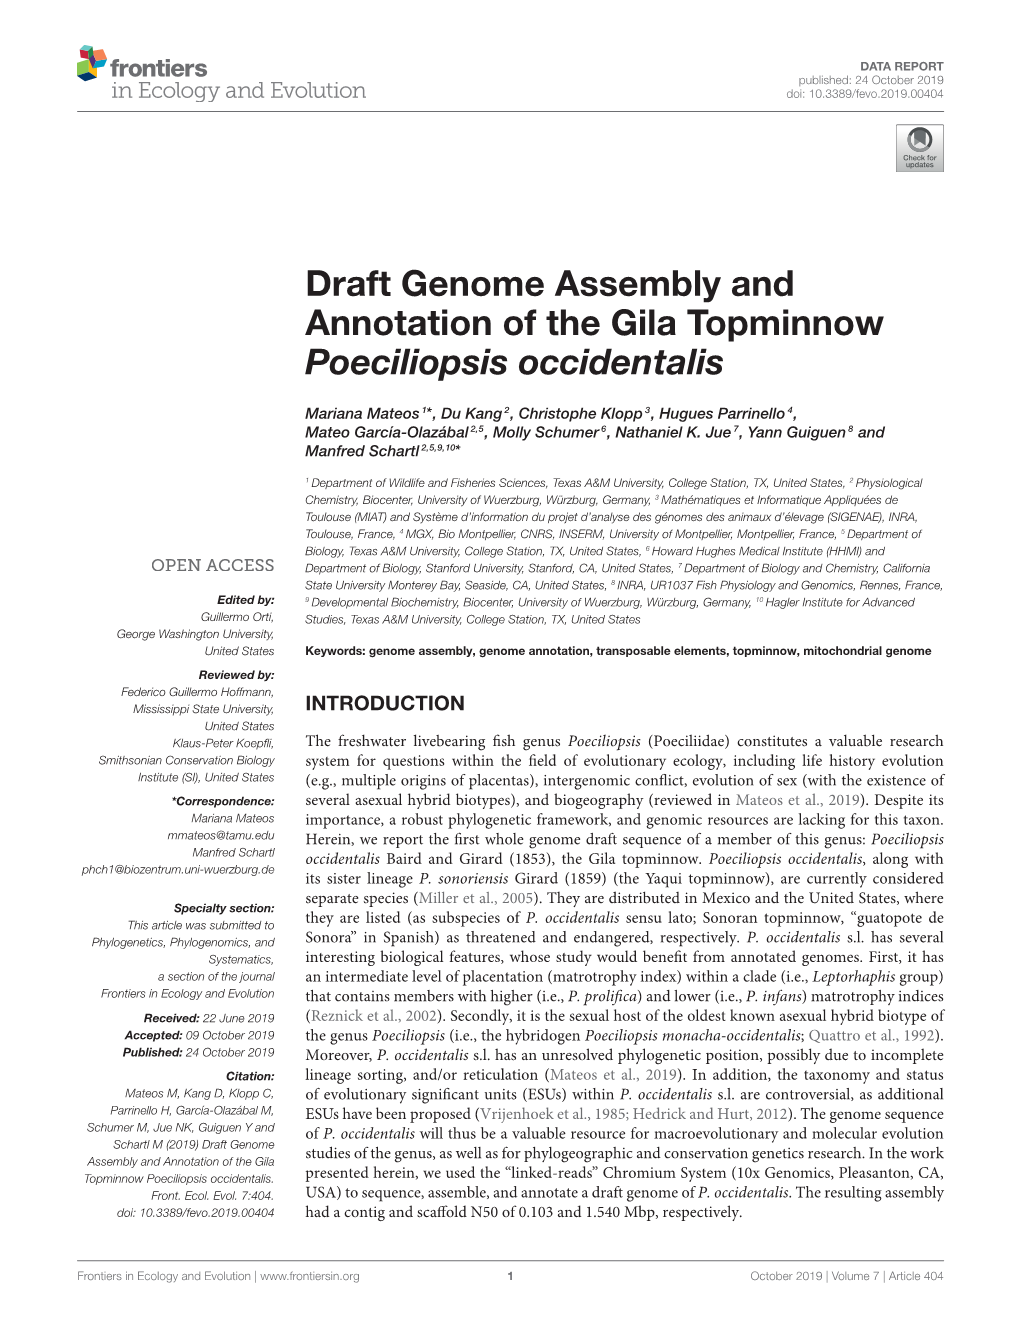 Draft Genome Assembly and Annotation of the Gila Topminnow Poeciliopsis Occidentalis